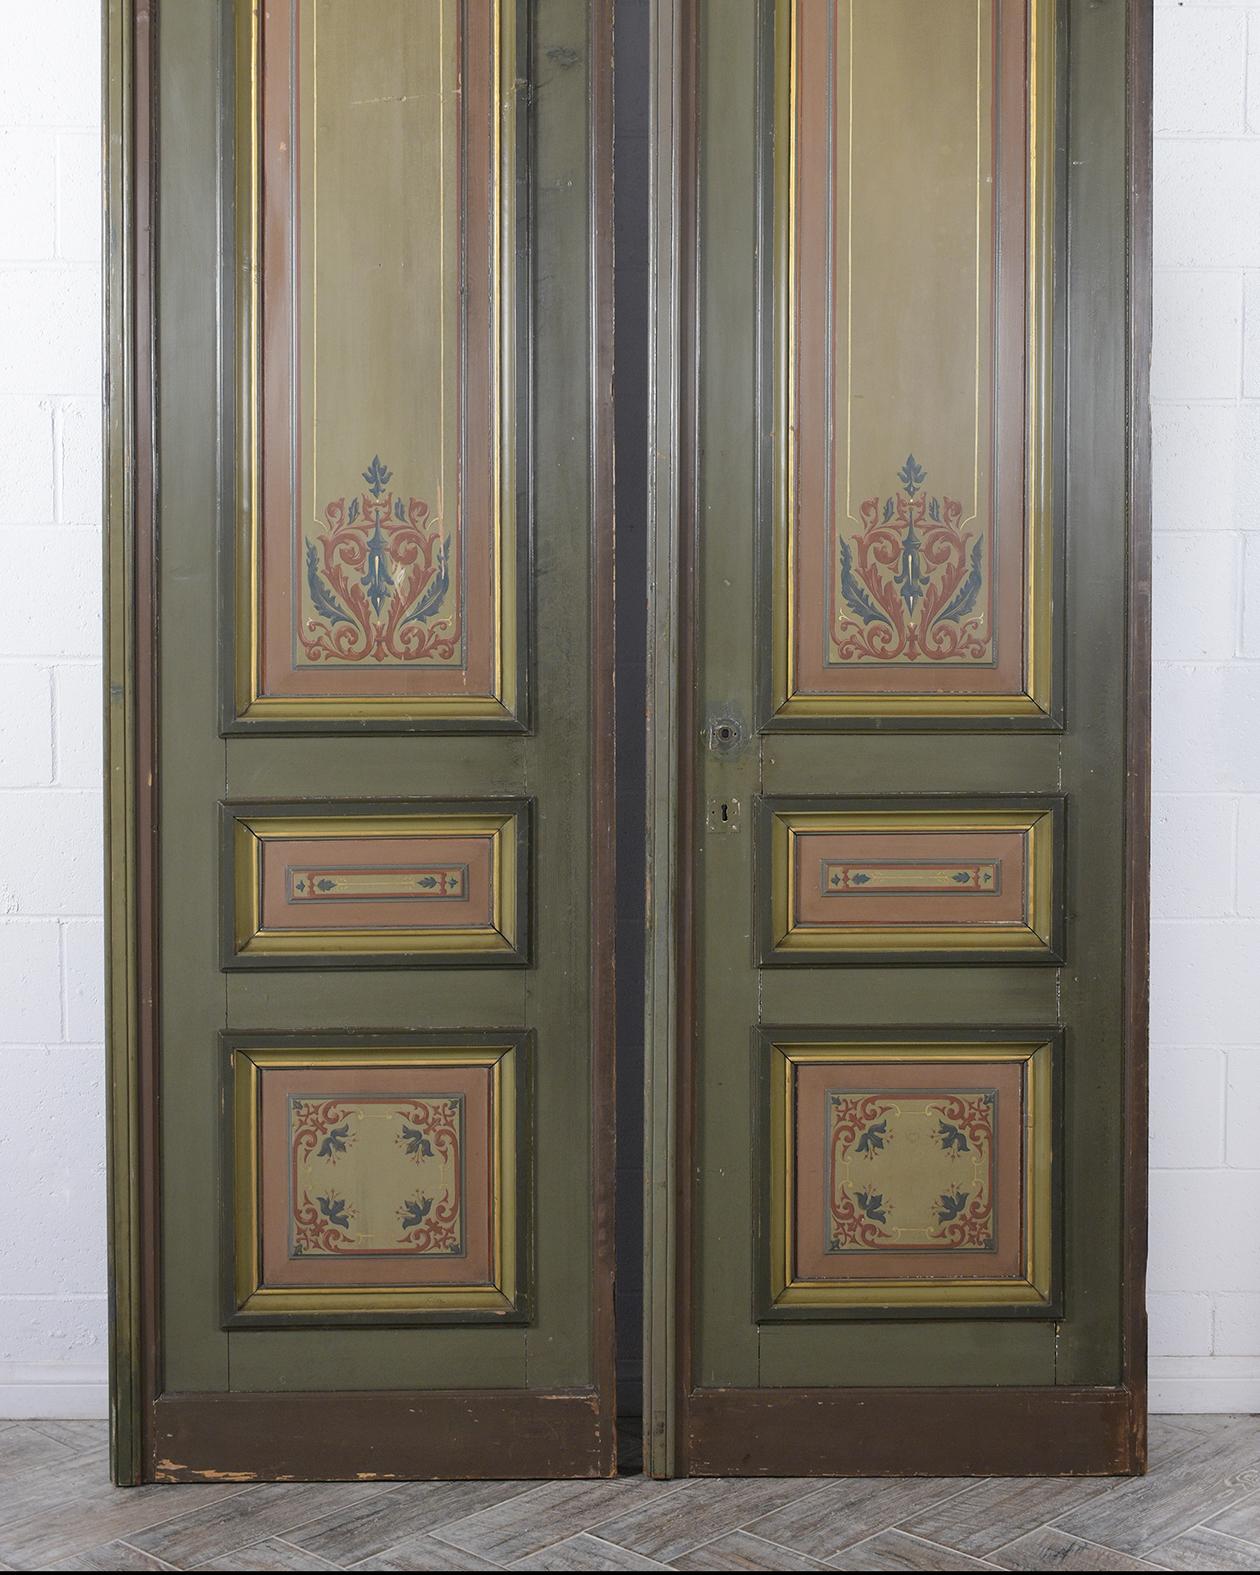 A remarkable pair of architectural doors beautiful crafted from maple wood. This set of paneling doors future an original green and dark grey color combination with two-sided eye-catching hand painted details, the set of doors are a great addition